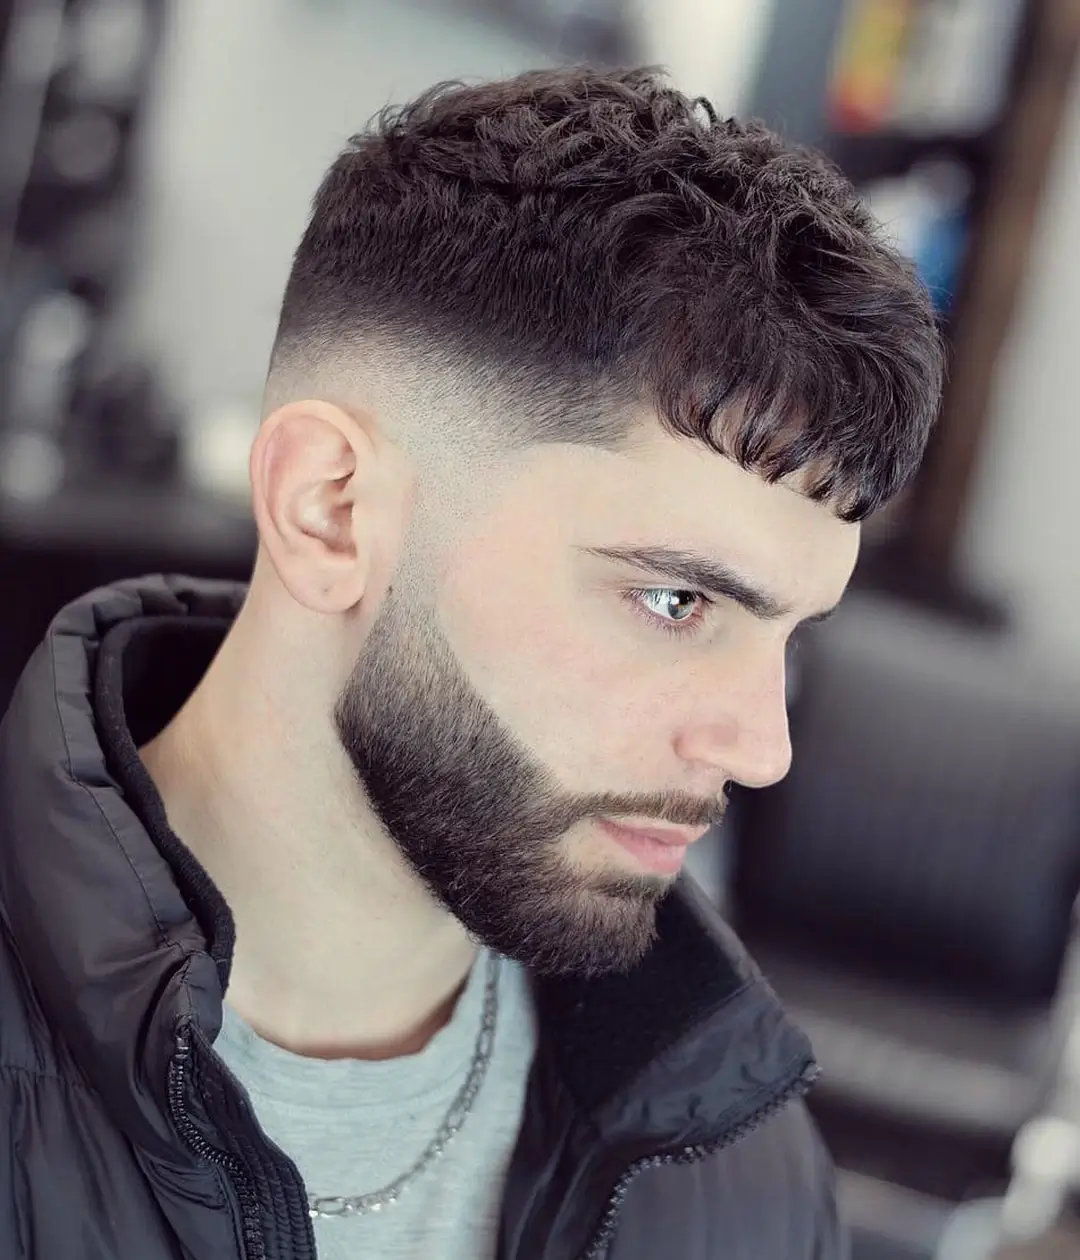 Men's Caesar Haircut with Medium Fade from Fifth Ave Barber Shop in Midtown NYC